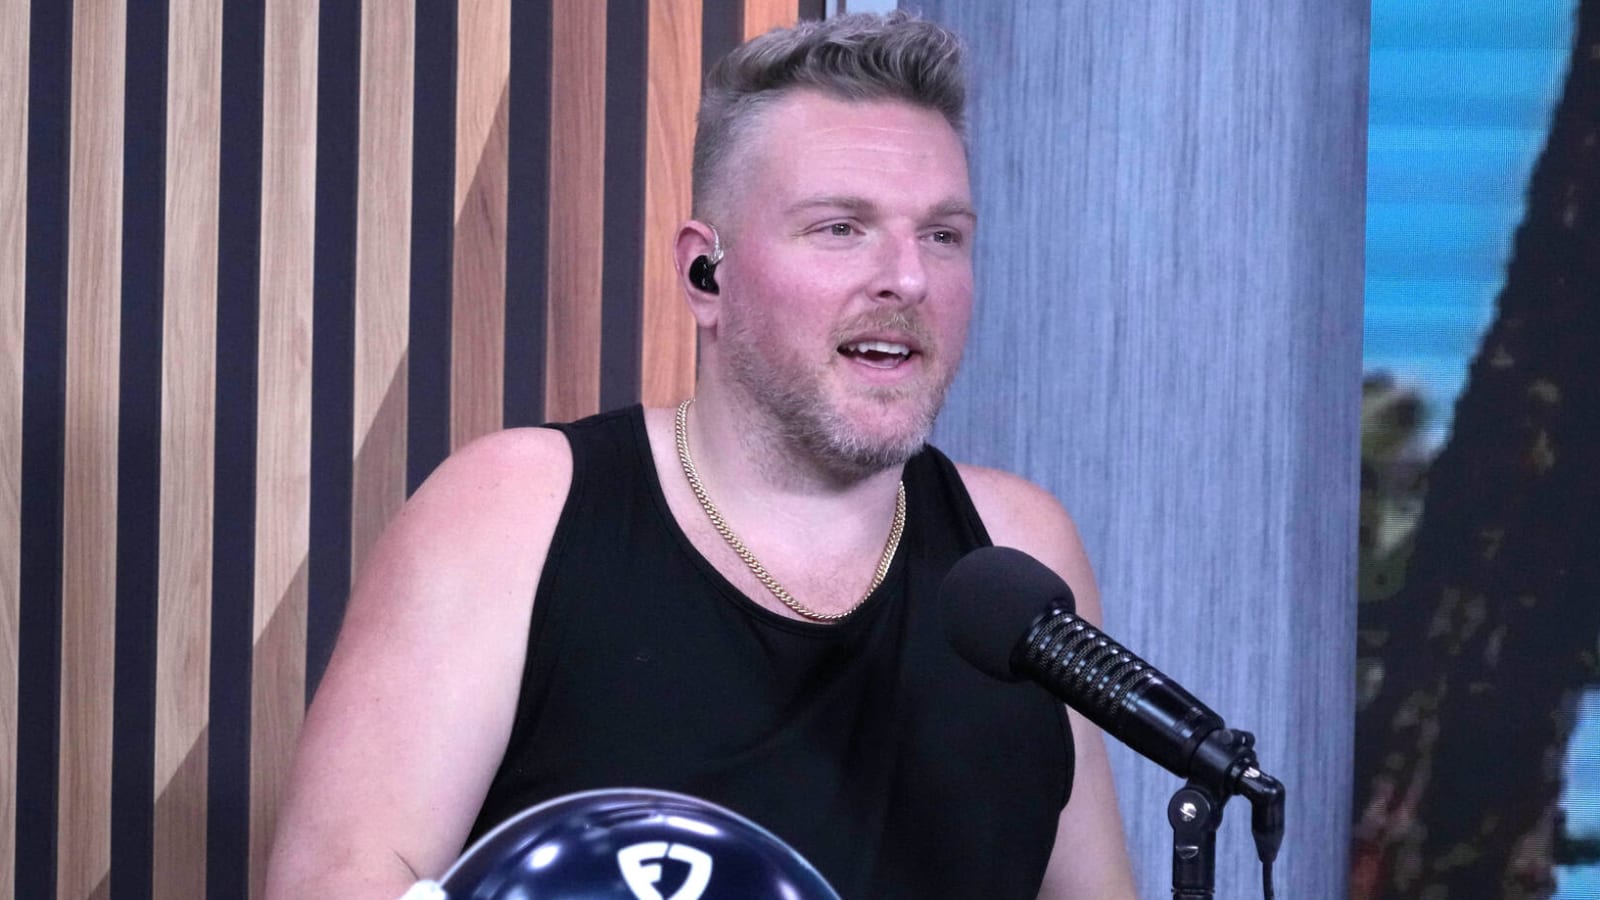 Fireman Ed comes after Pat McAfee, co-host for 'stolen valor' comments